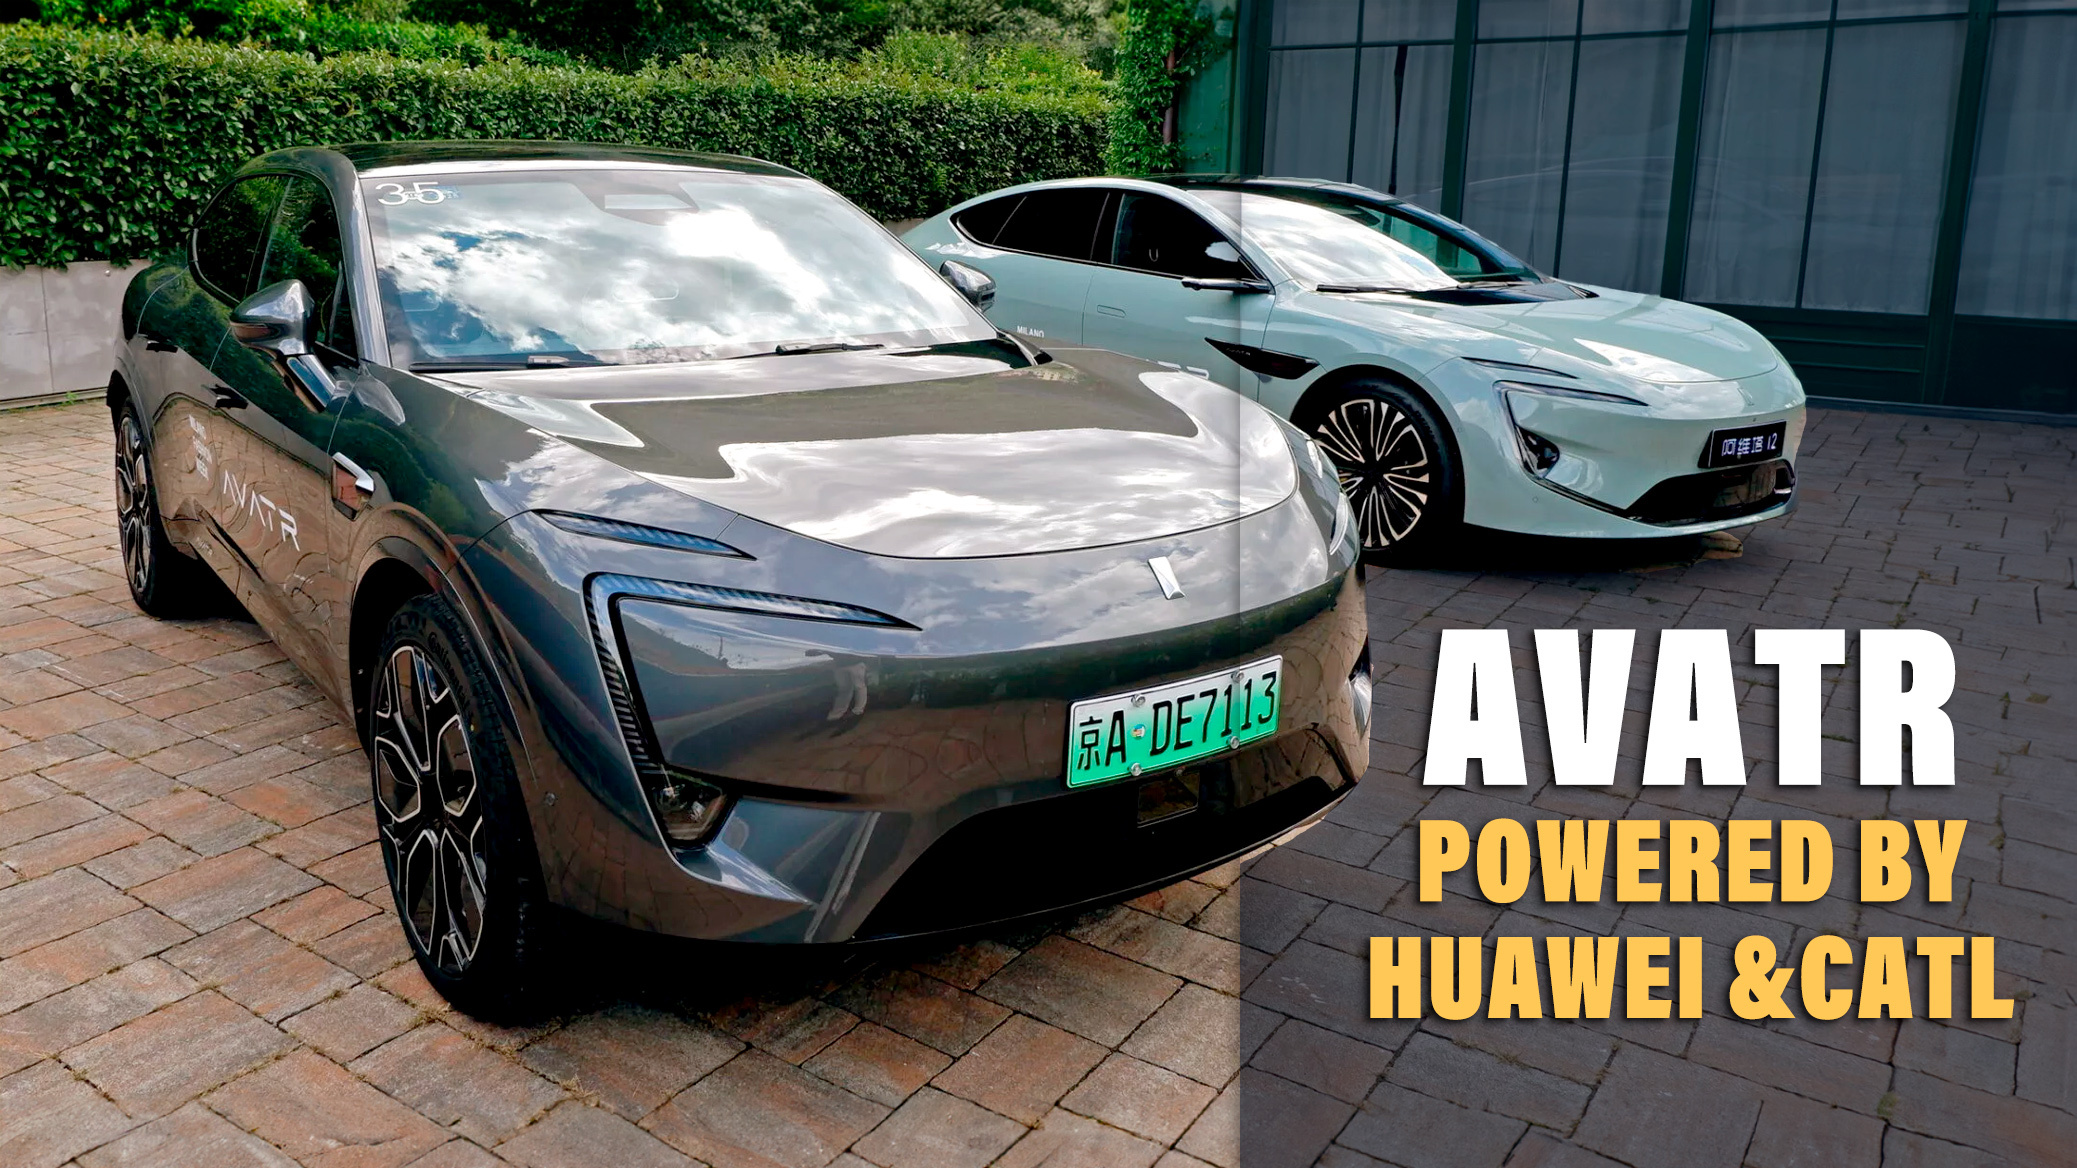 We Get Up Close To The Avatr 11 And 12 EVs From China Aiming To Shake Up The Luxury Market Auto Recent